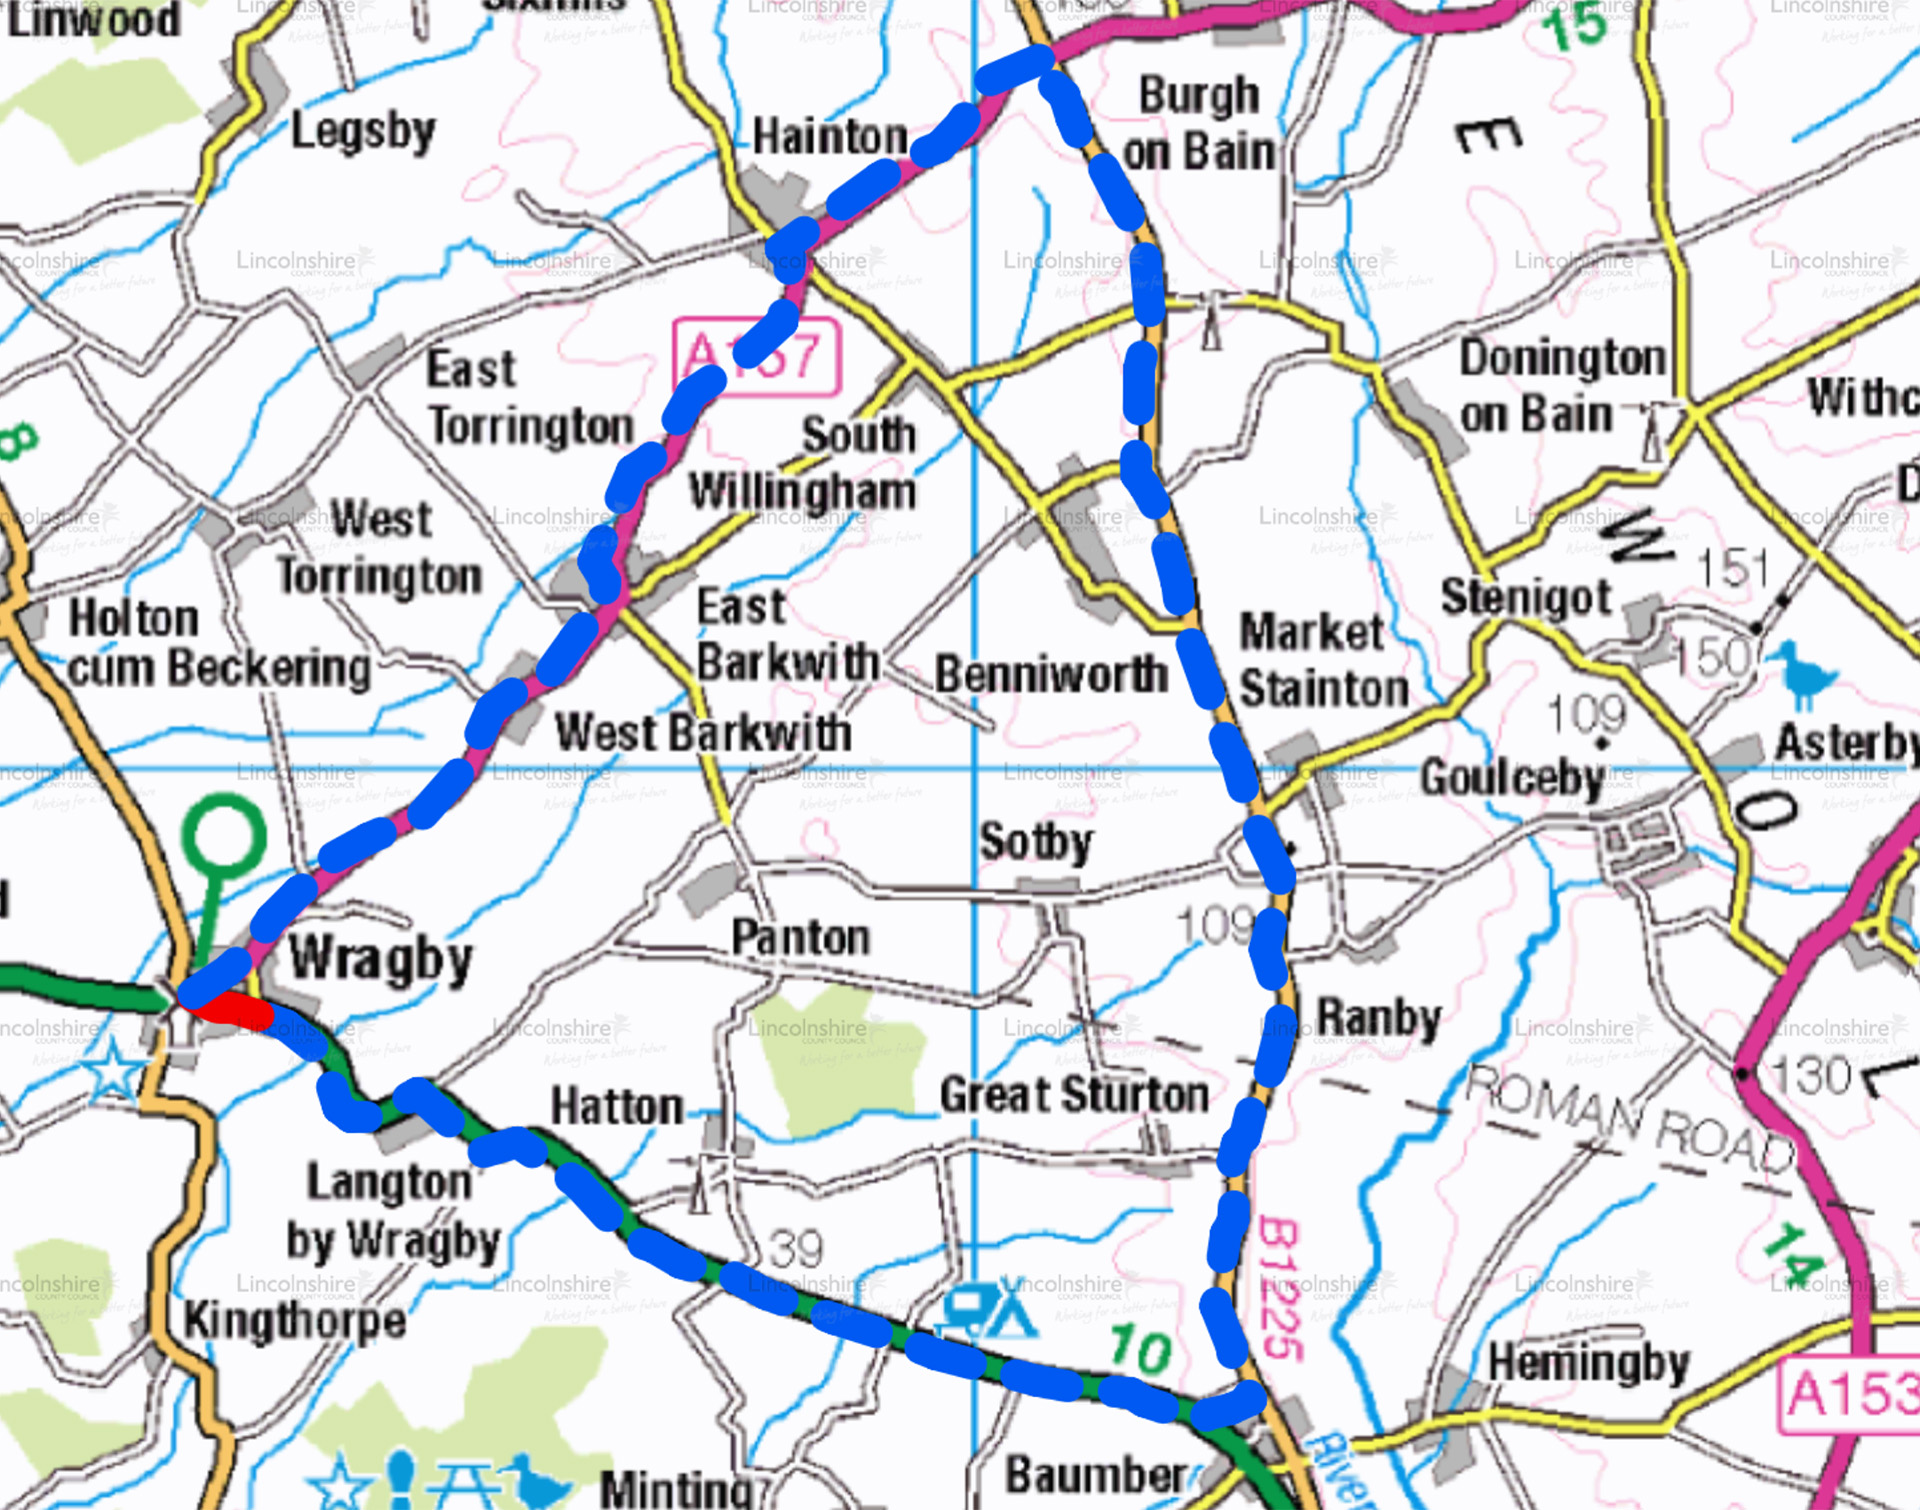 Diversion Route - A157 Wragby